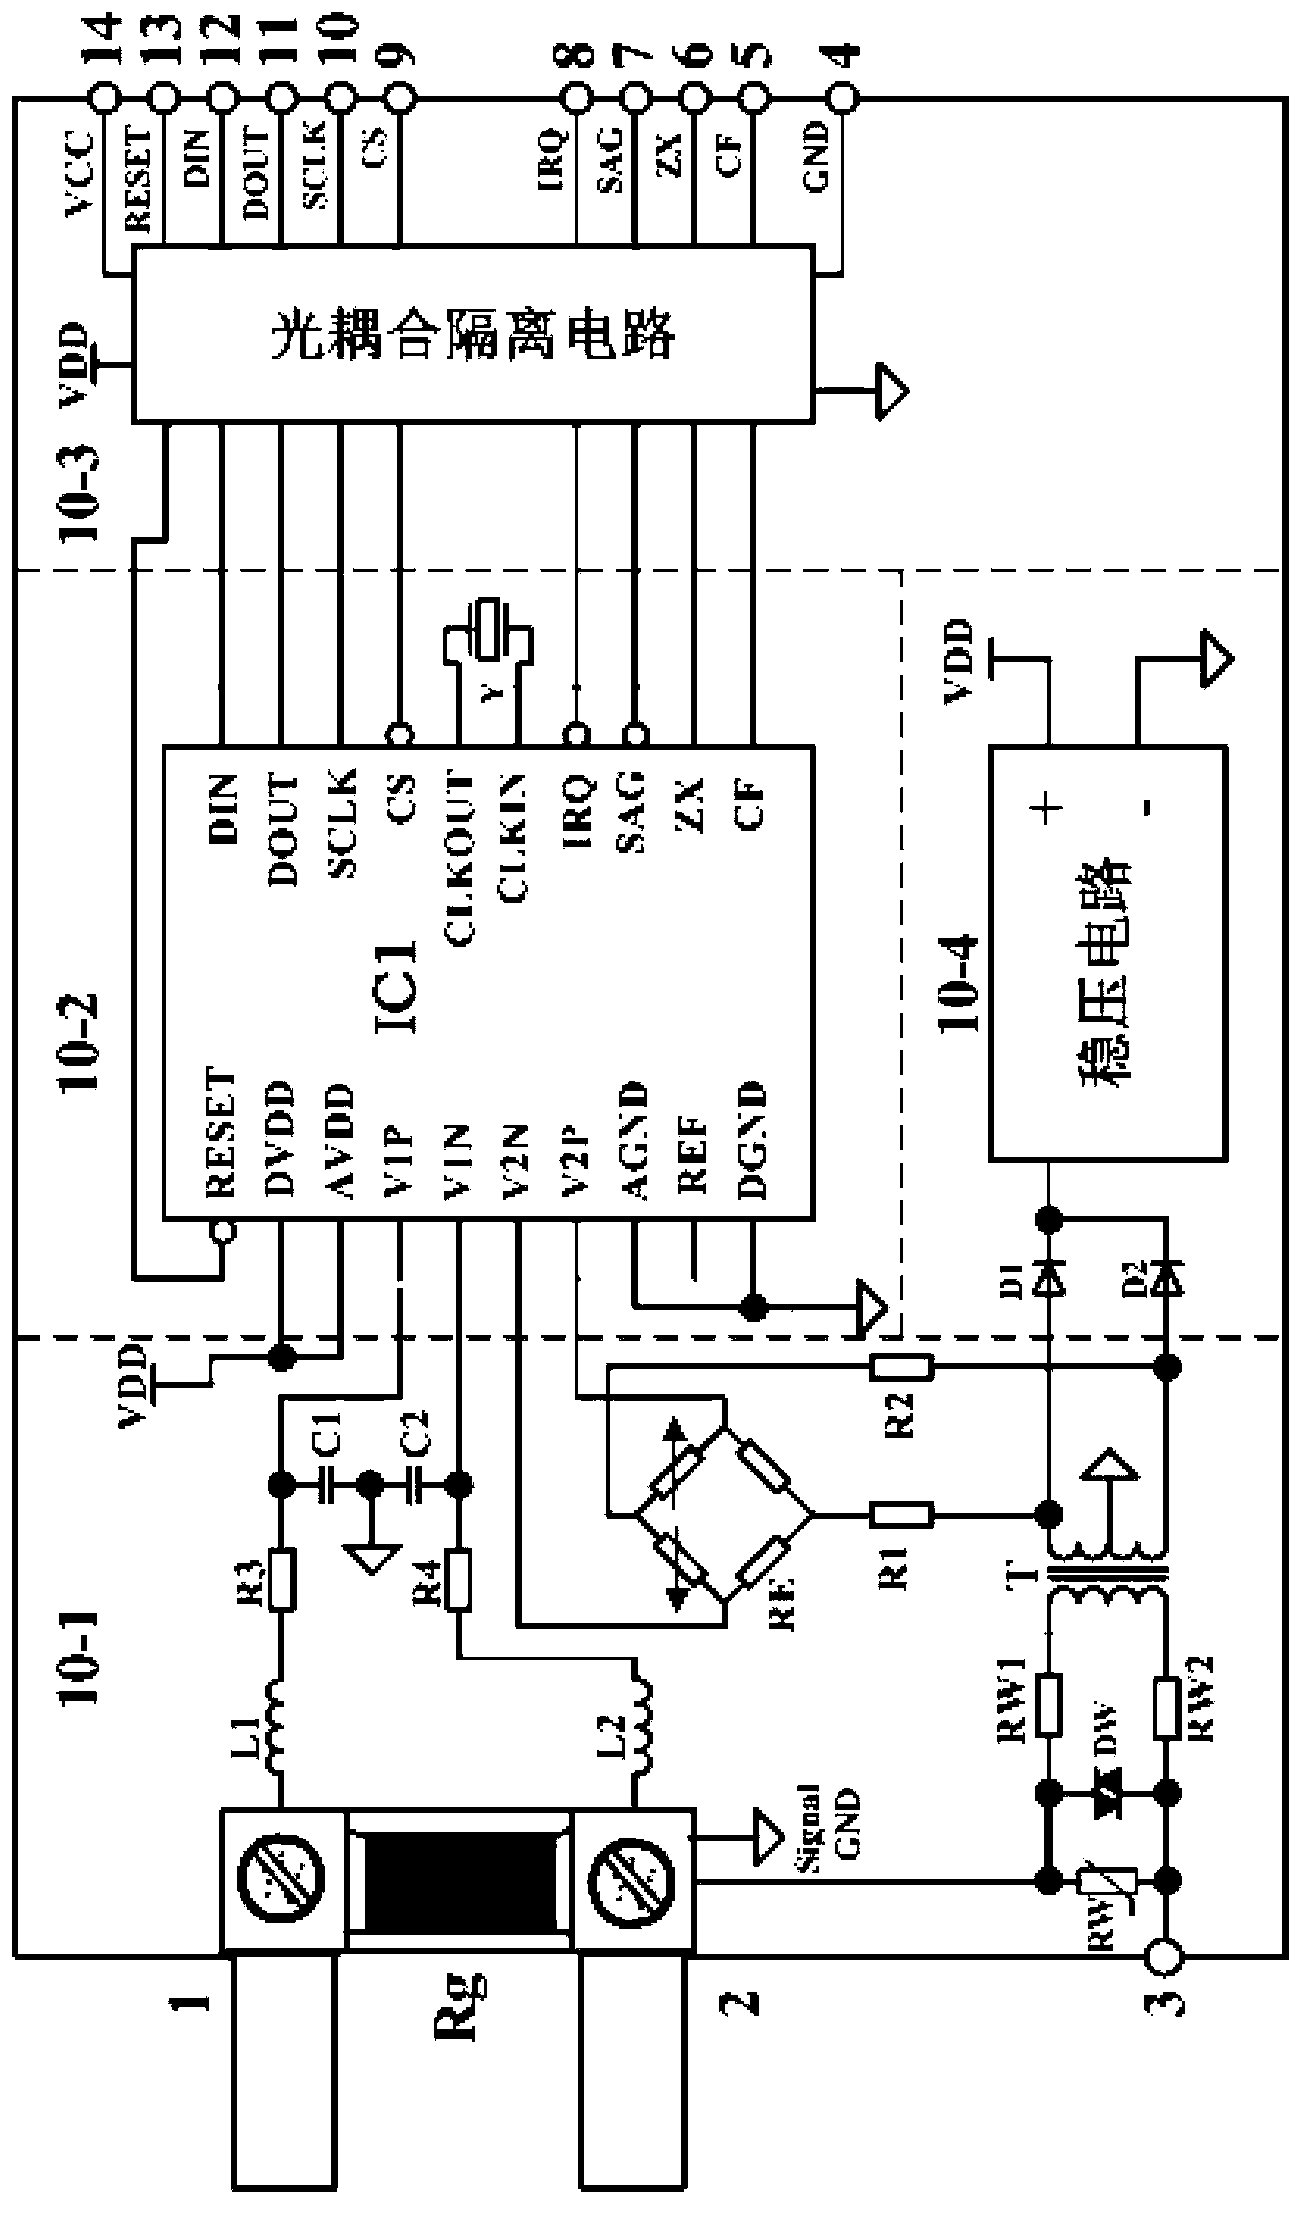 Isolated serial peripheral interface (SPI) bus electric energy measuring module and APLC electricity meter